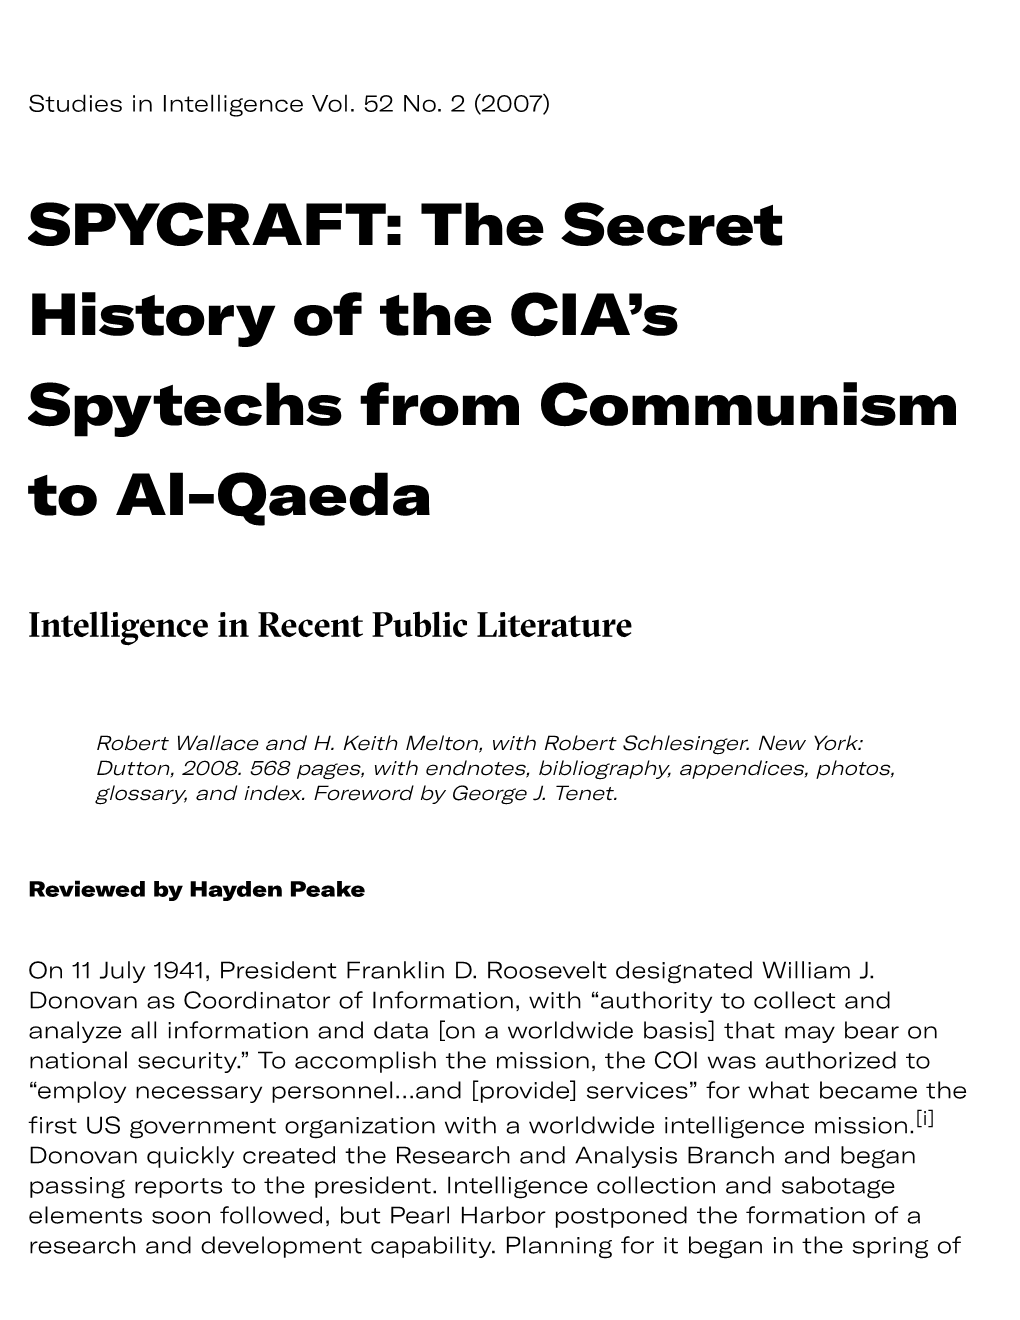 SPYCRAFT: the Secret History of the CIA’S Spytechs from Communism to Al-Qaeda